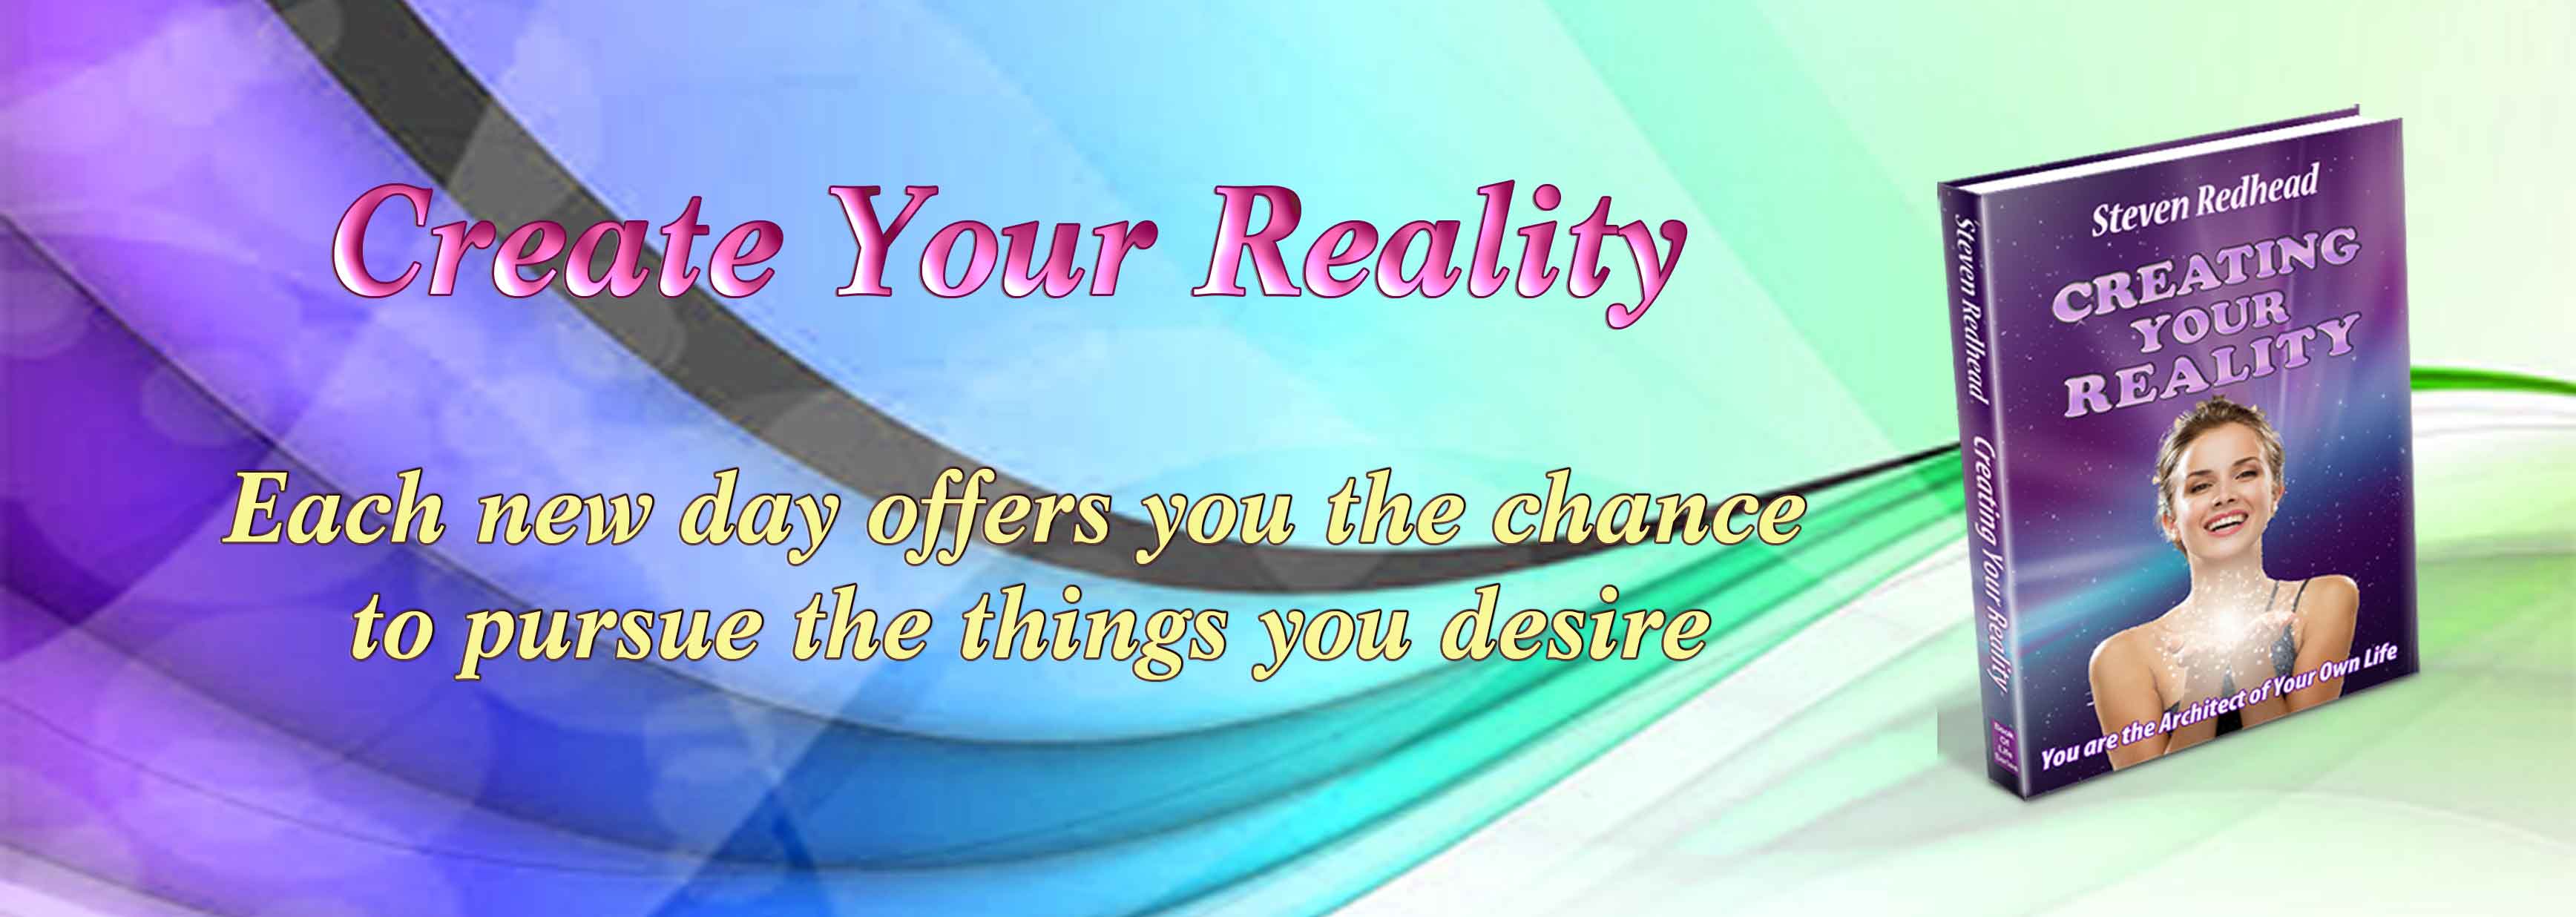 Creating Your Reality Book